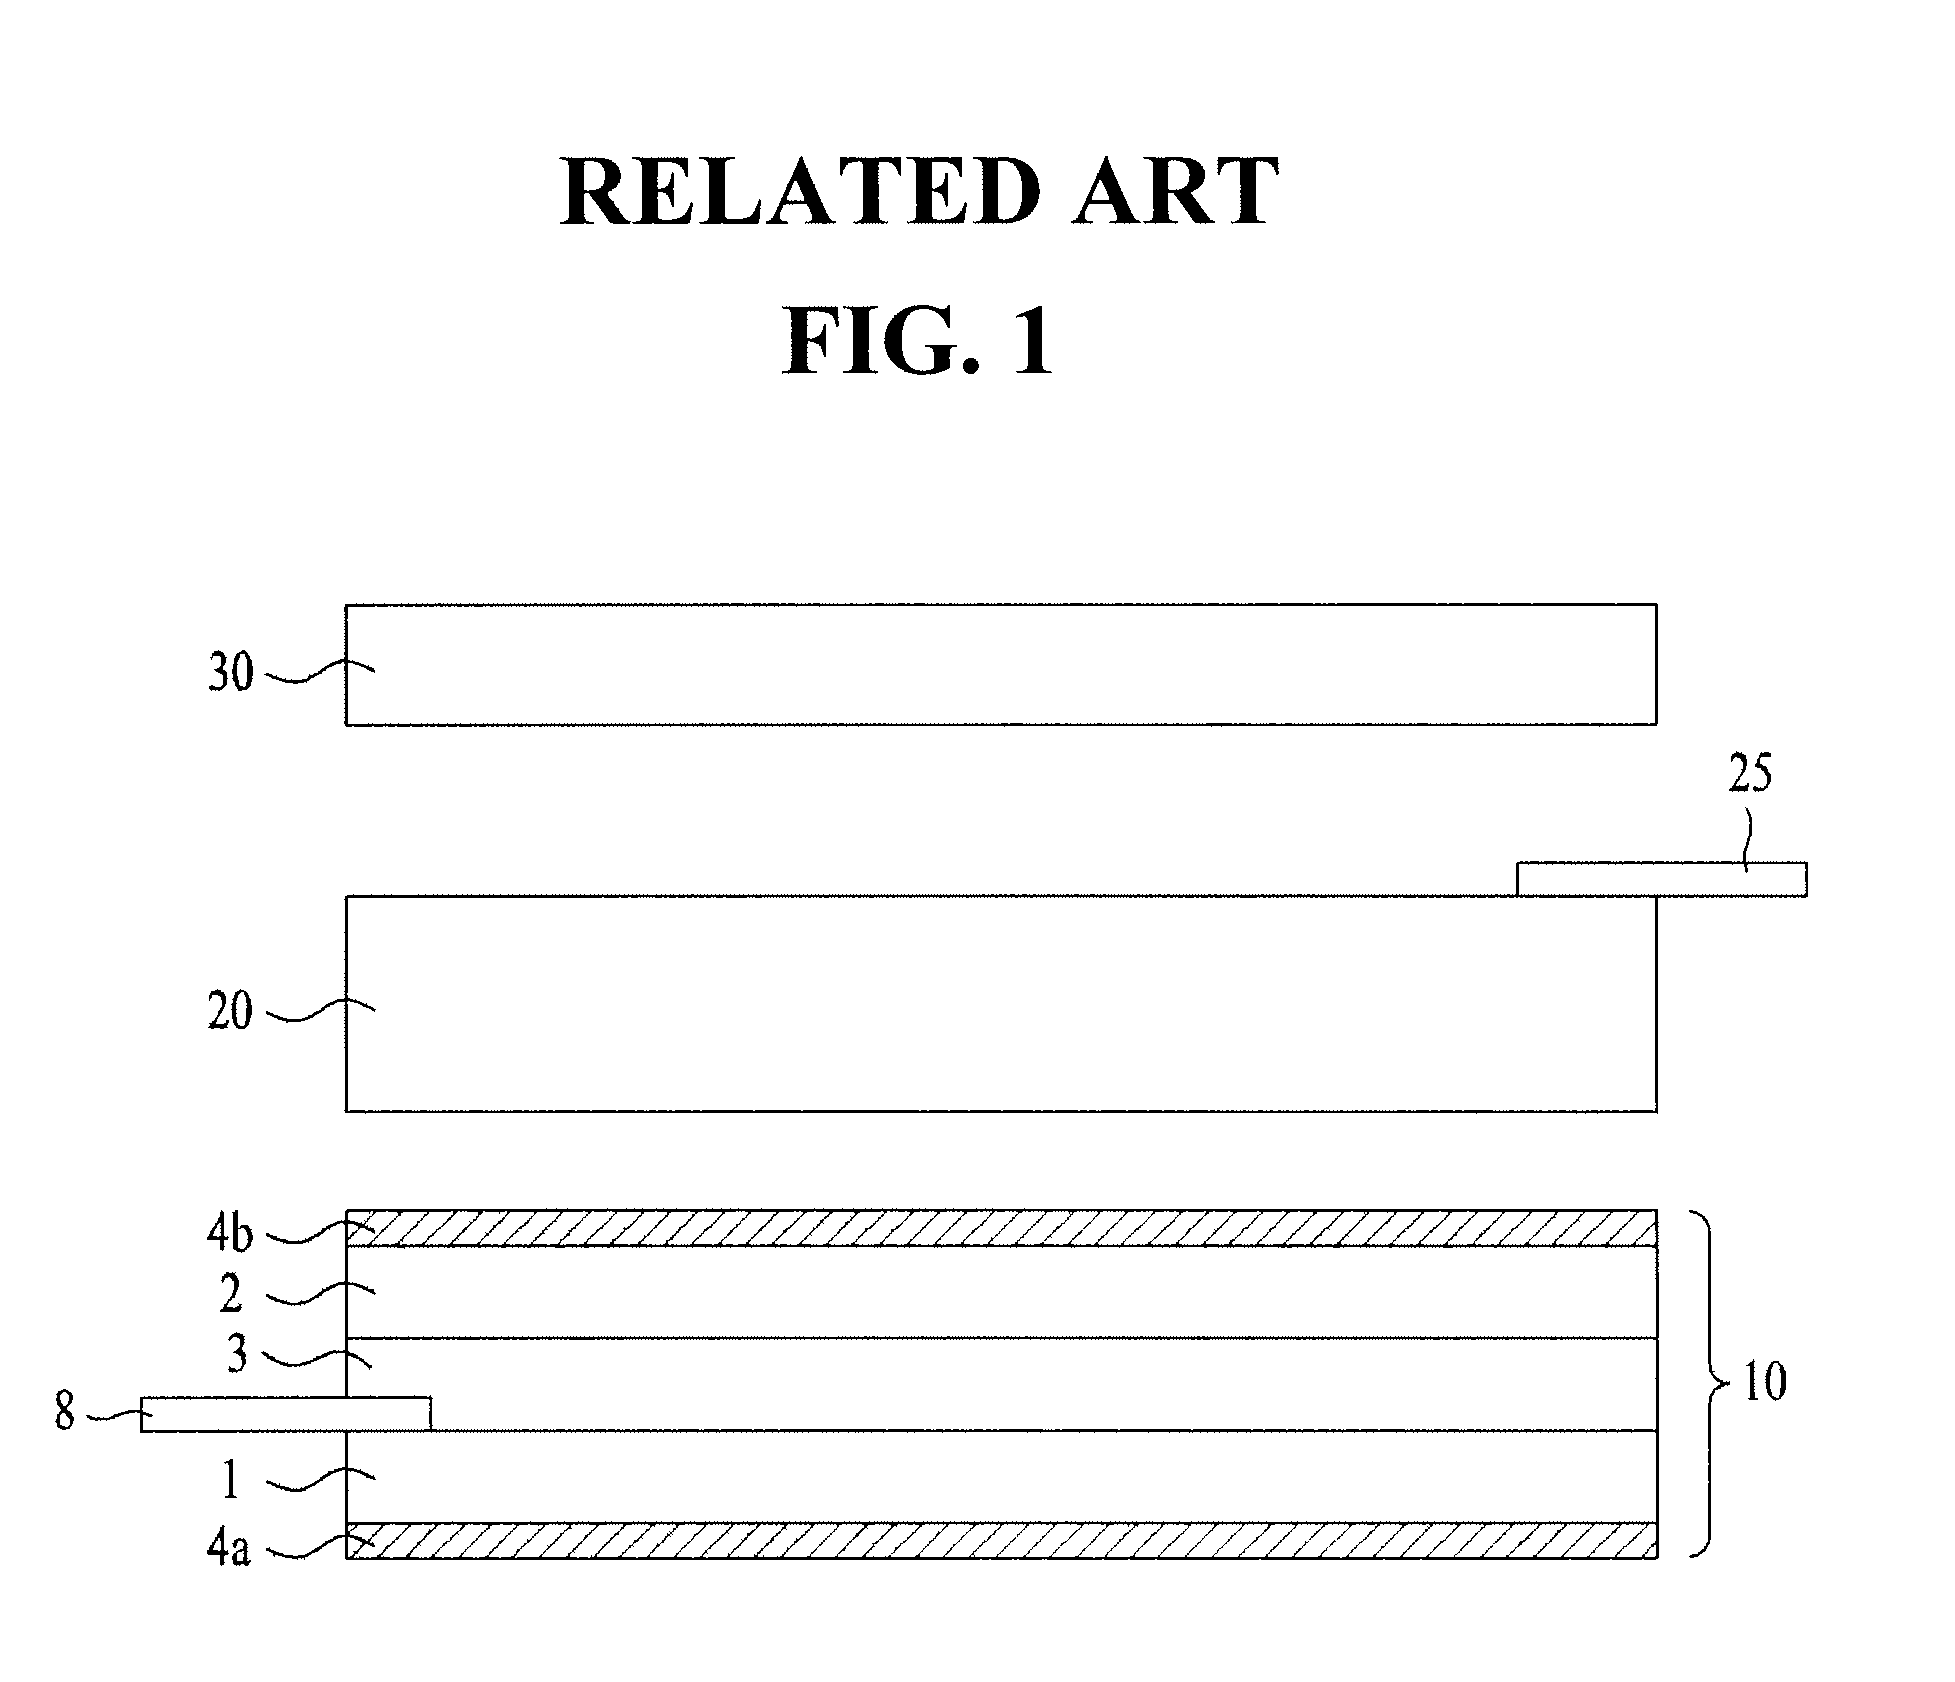 Touch panel-integrated liquid crystal display device